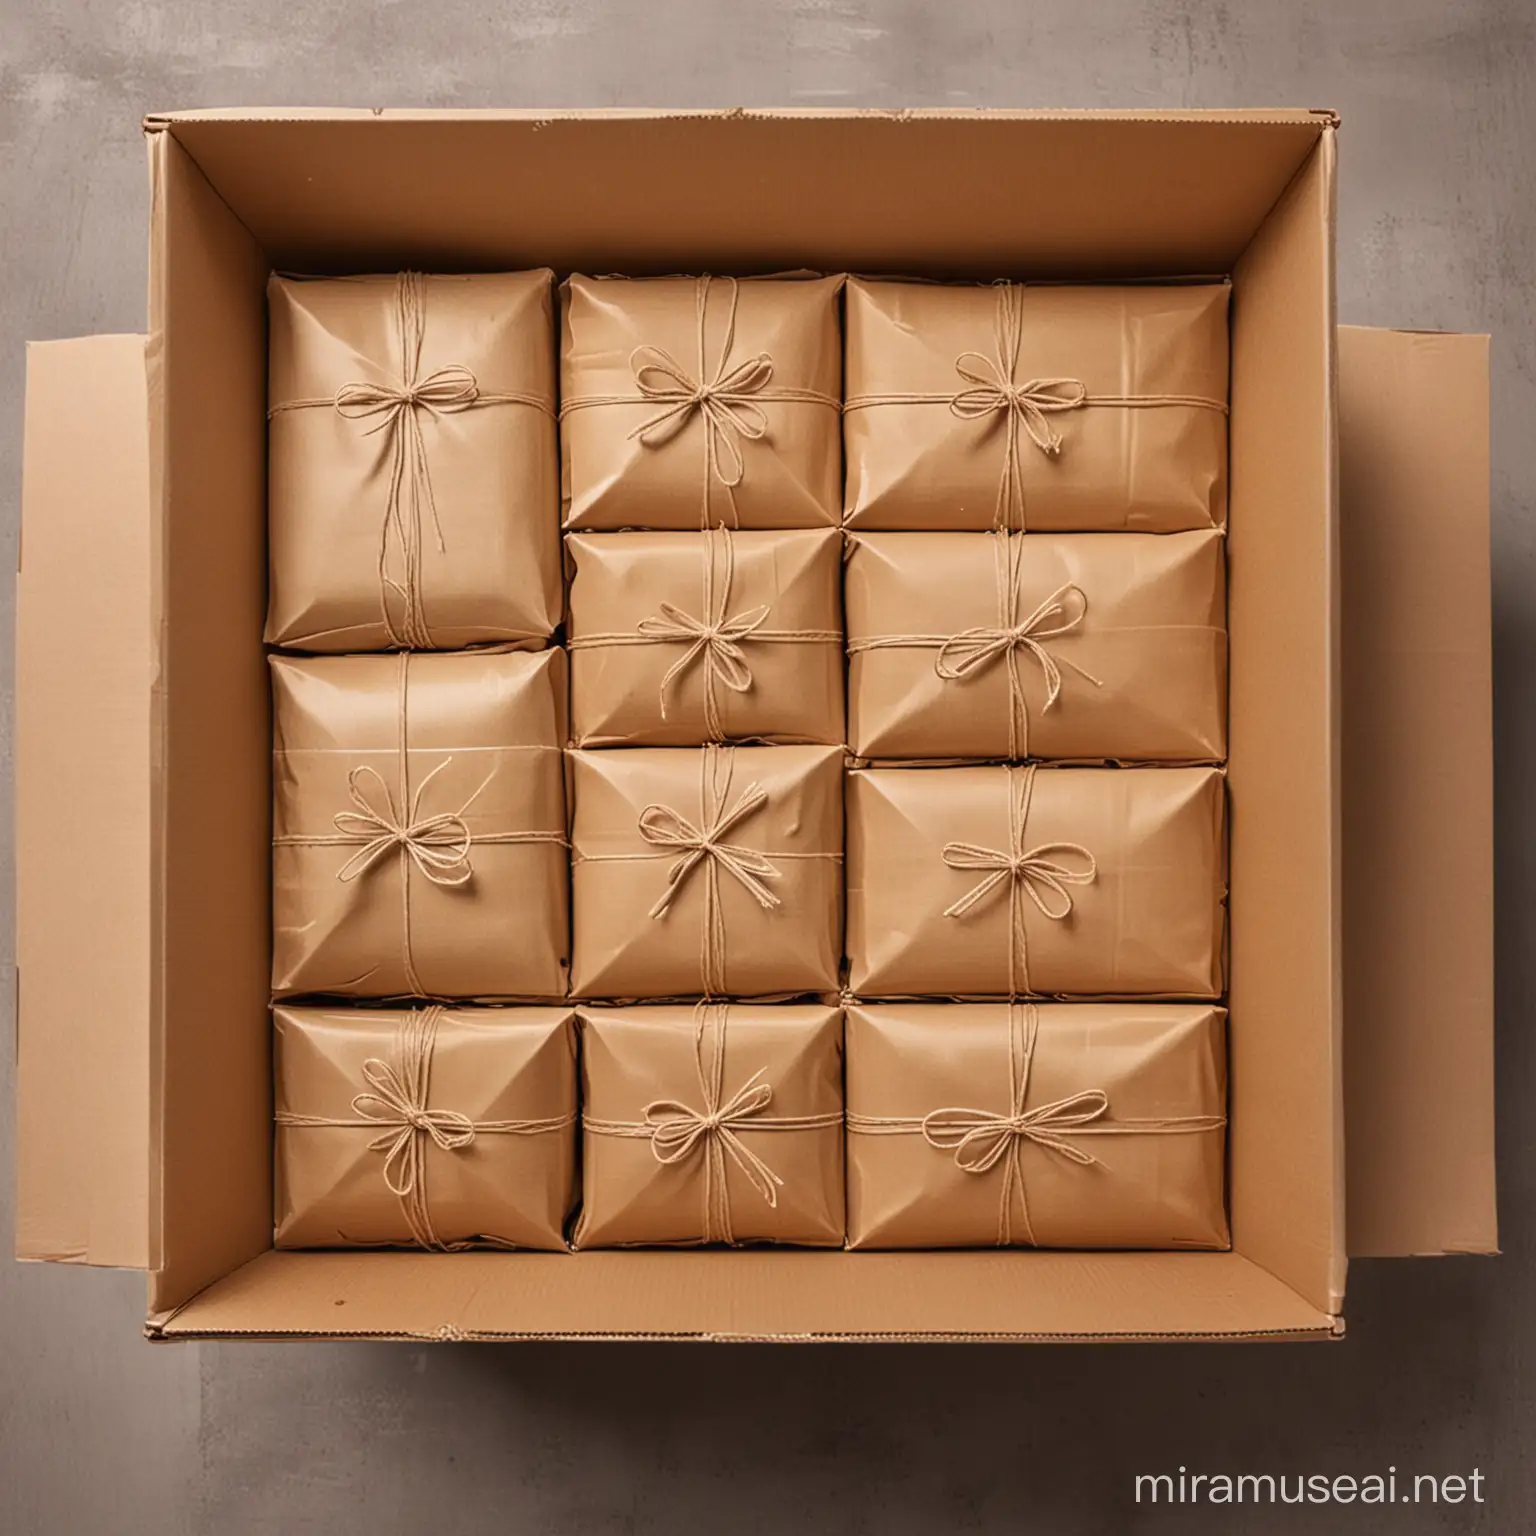 Arranging Smaller Parcels in a Large Carton Organizing Shipping Items